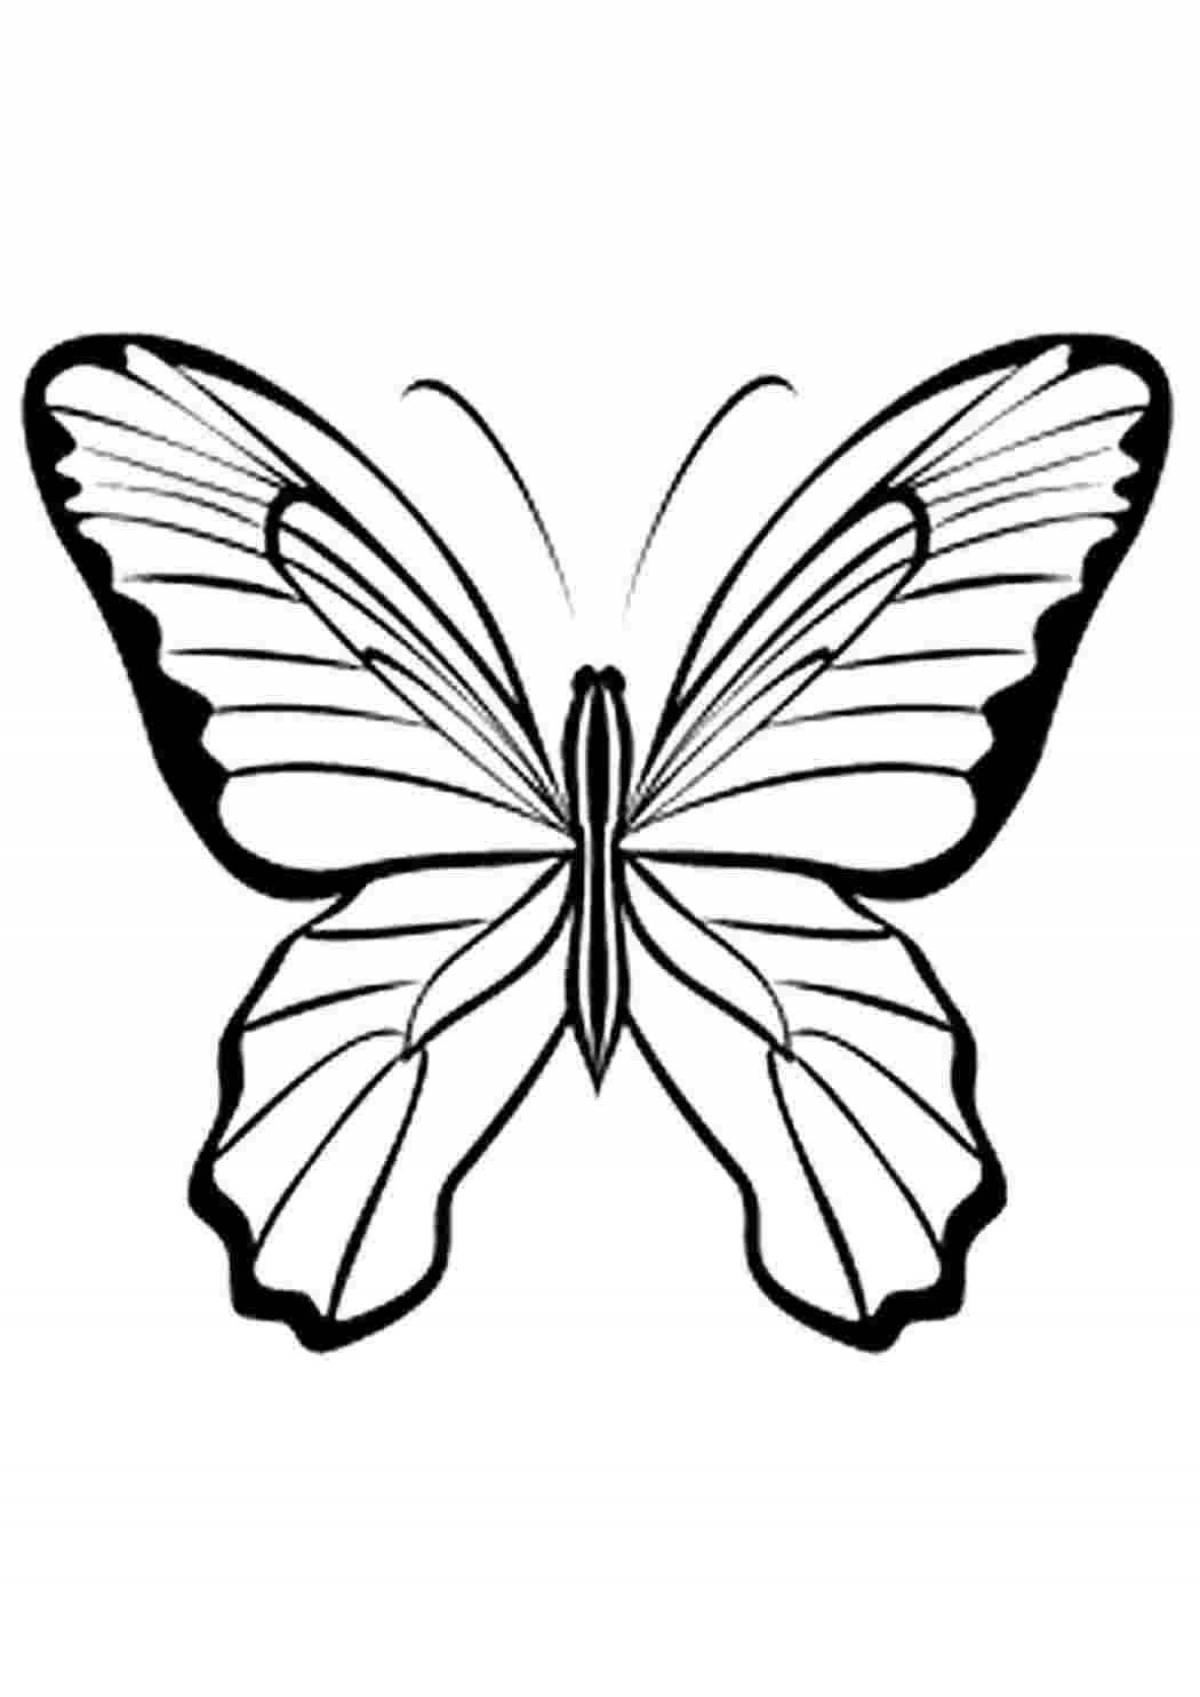 Coloring butterfly art stencil